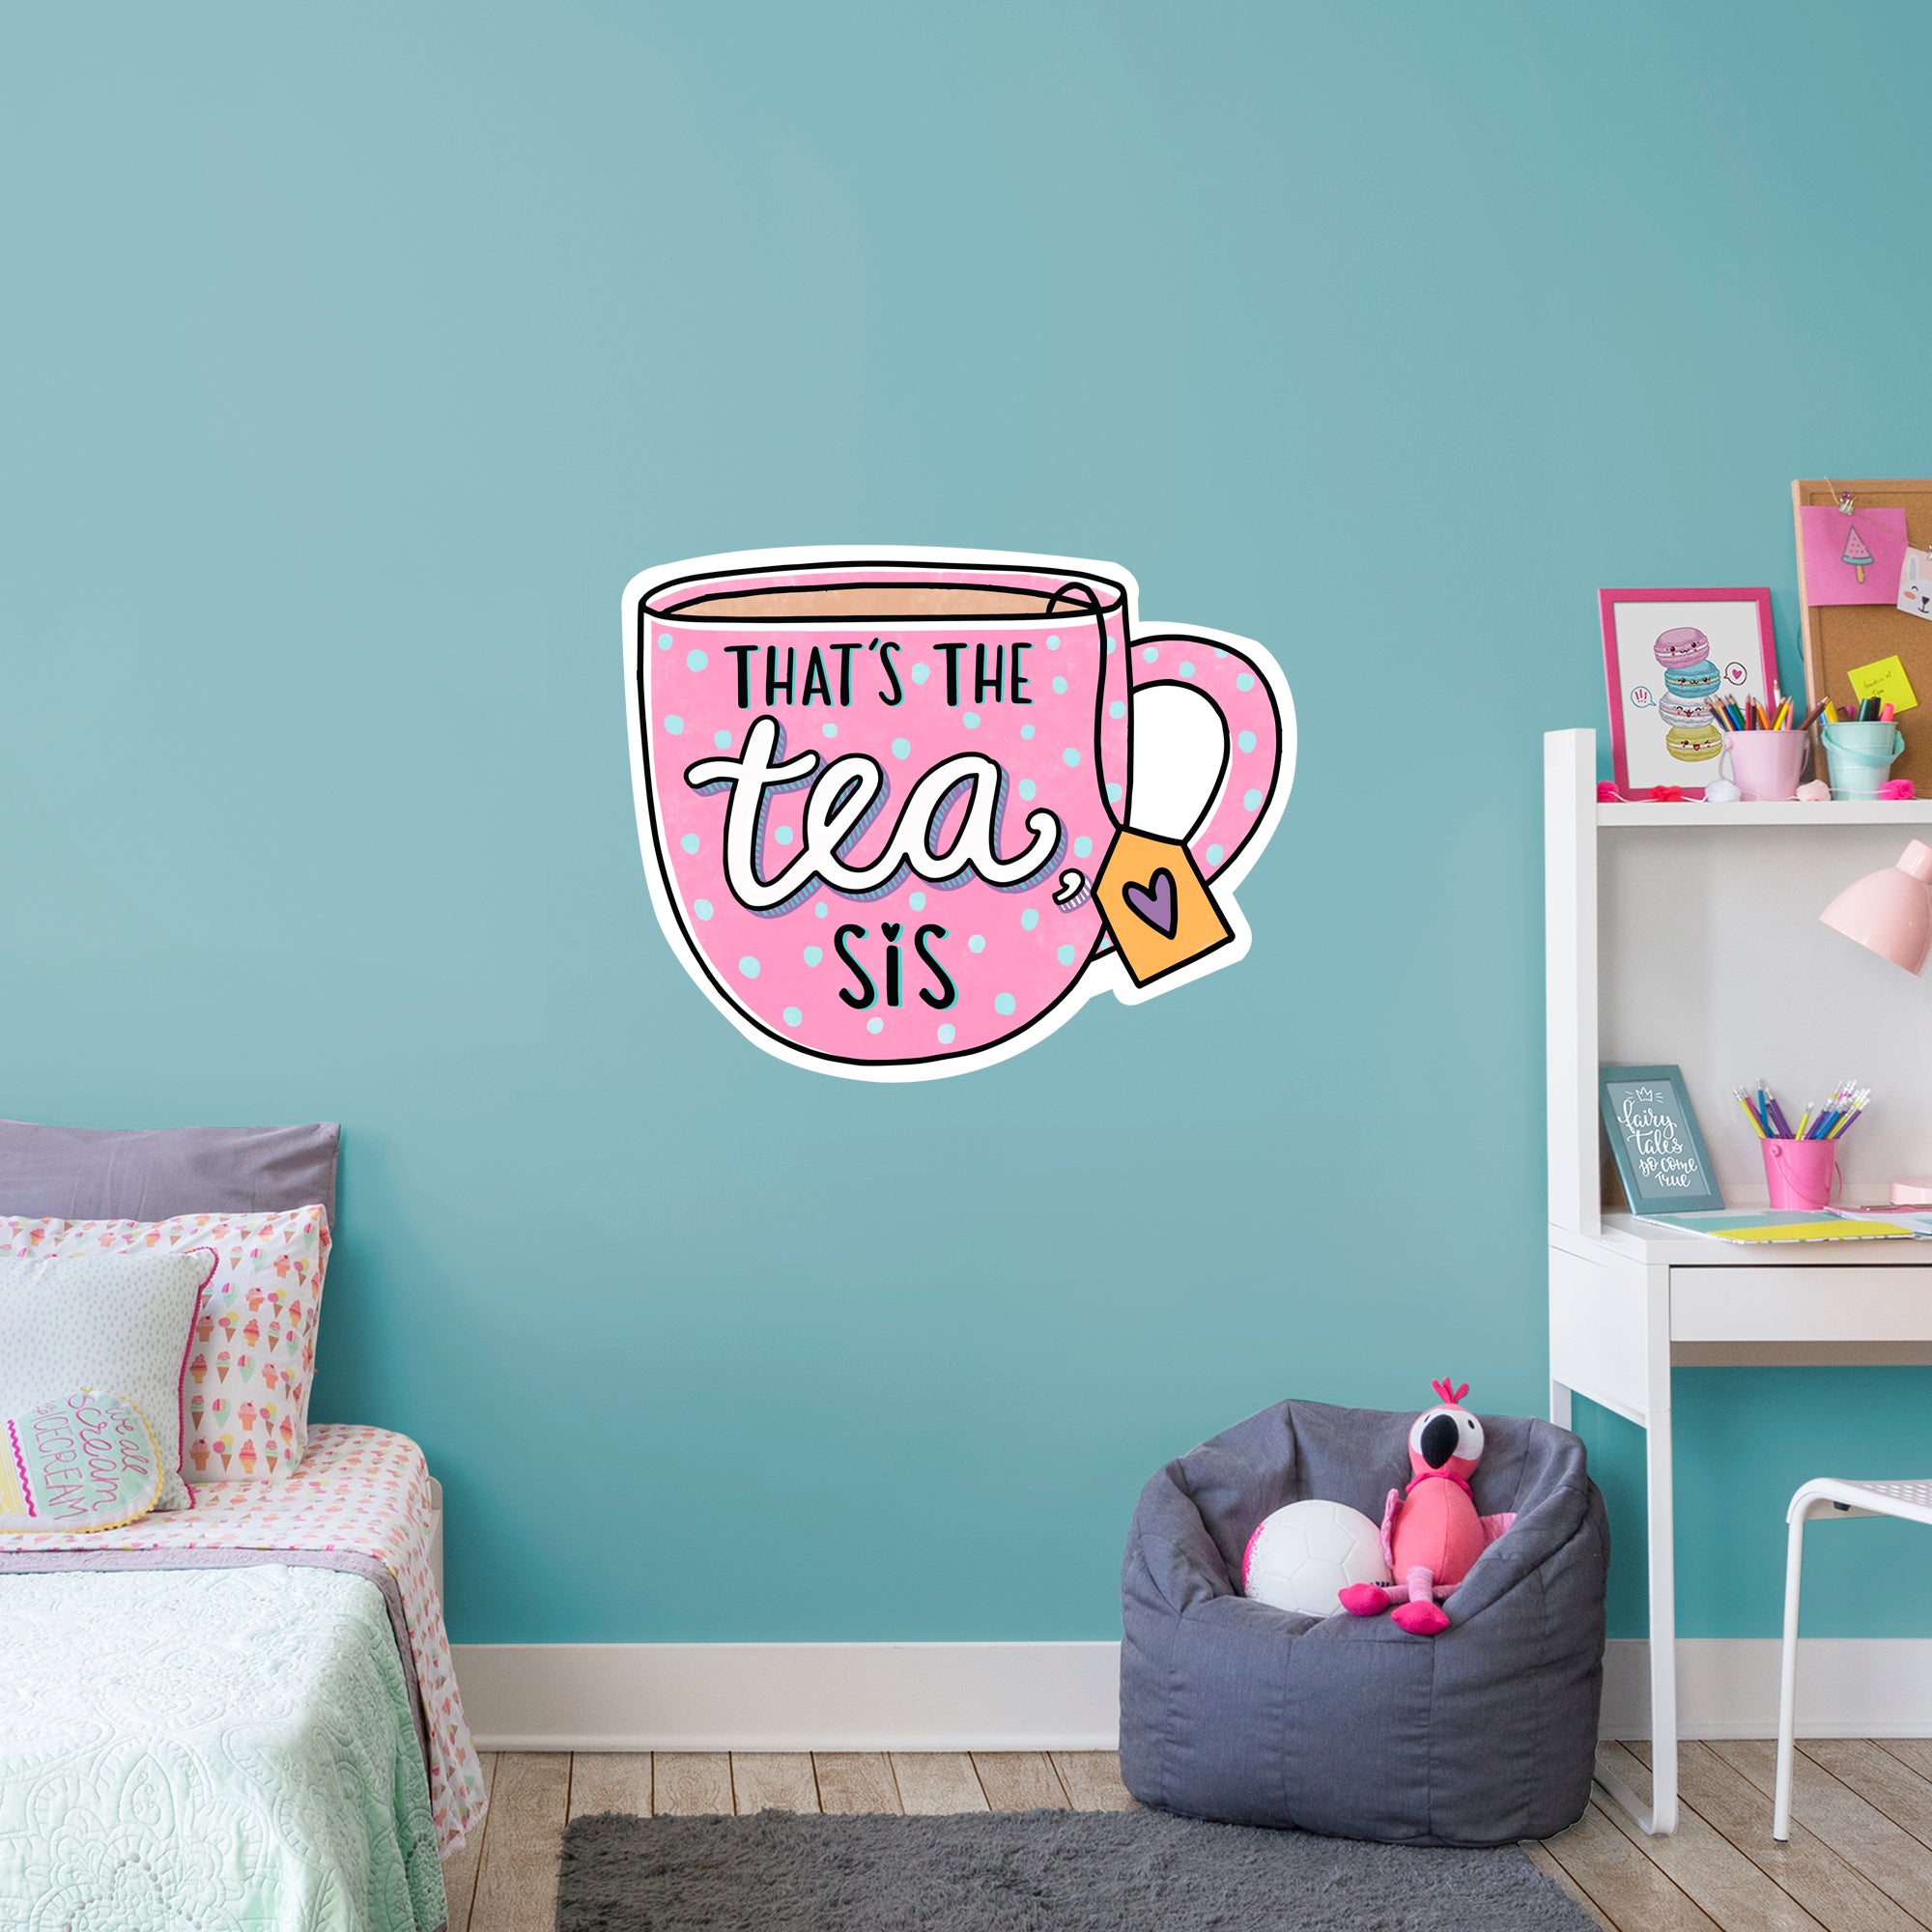 Thats The Tea Sis - Officially Licensed Big Moods Removable Wall Decal Giant Decal (30"W x 38"H) by Fathead | Vinyl